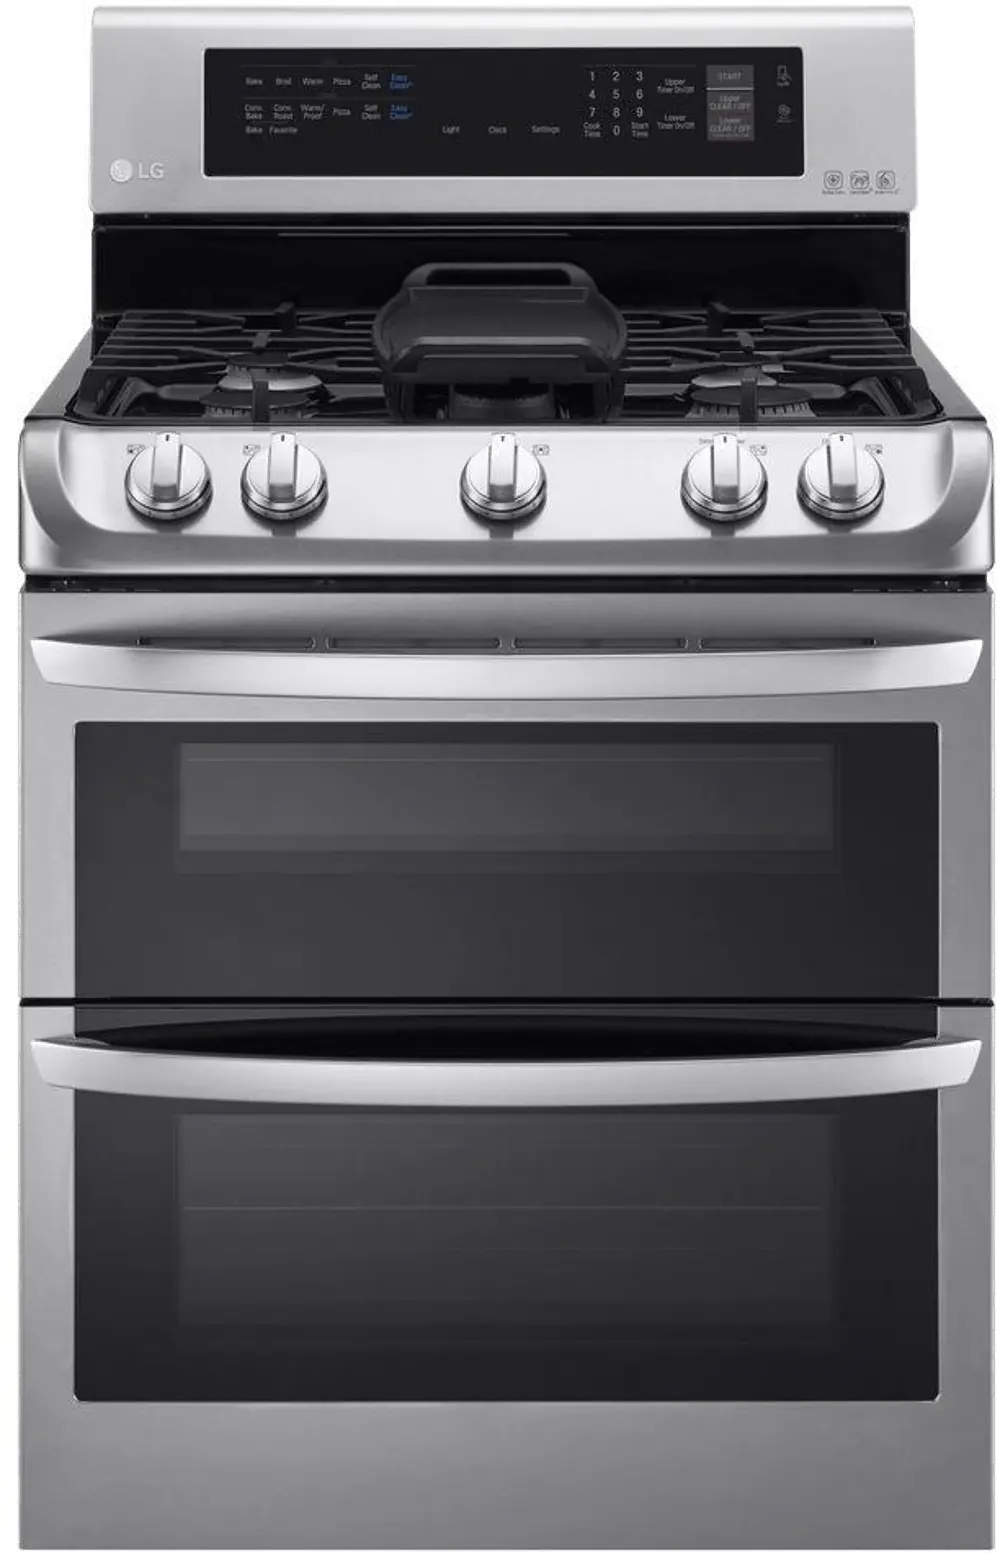 LDG4315ST LG Double Oven Gas Range with ProBake Convection -  6.9 cu. ft. Stainless Steel-1